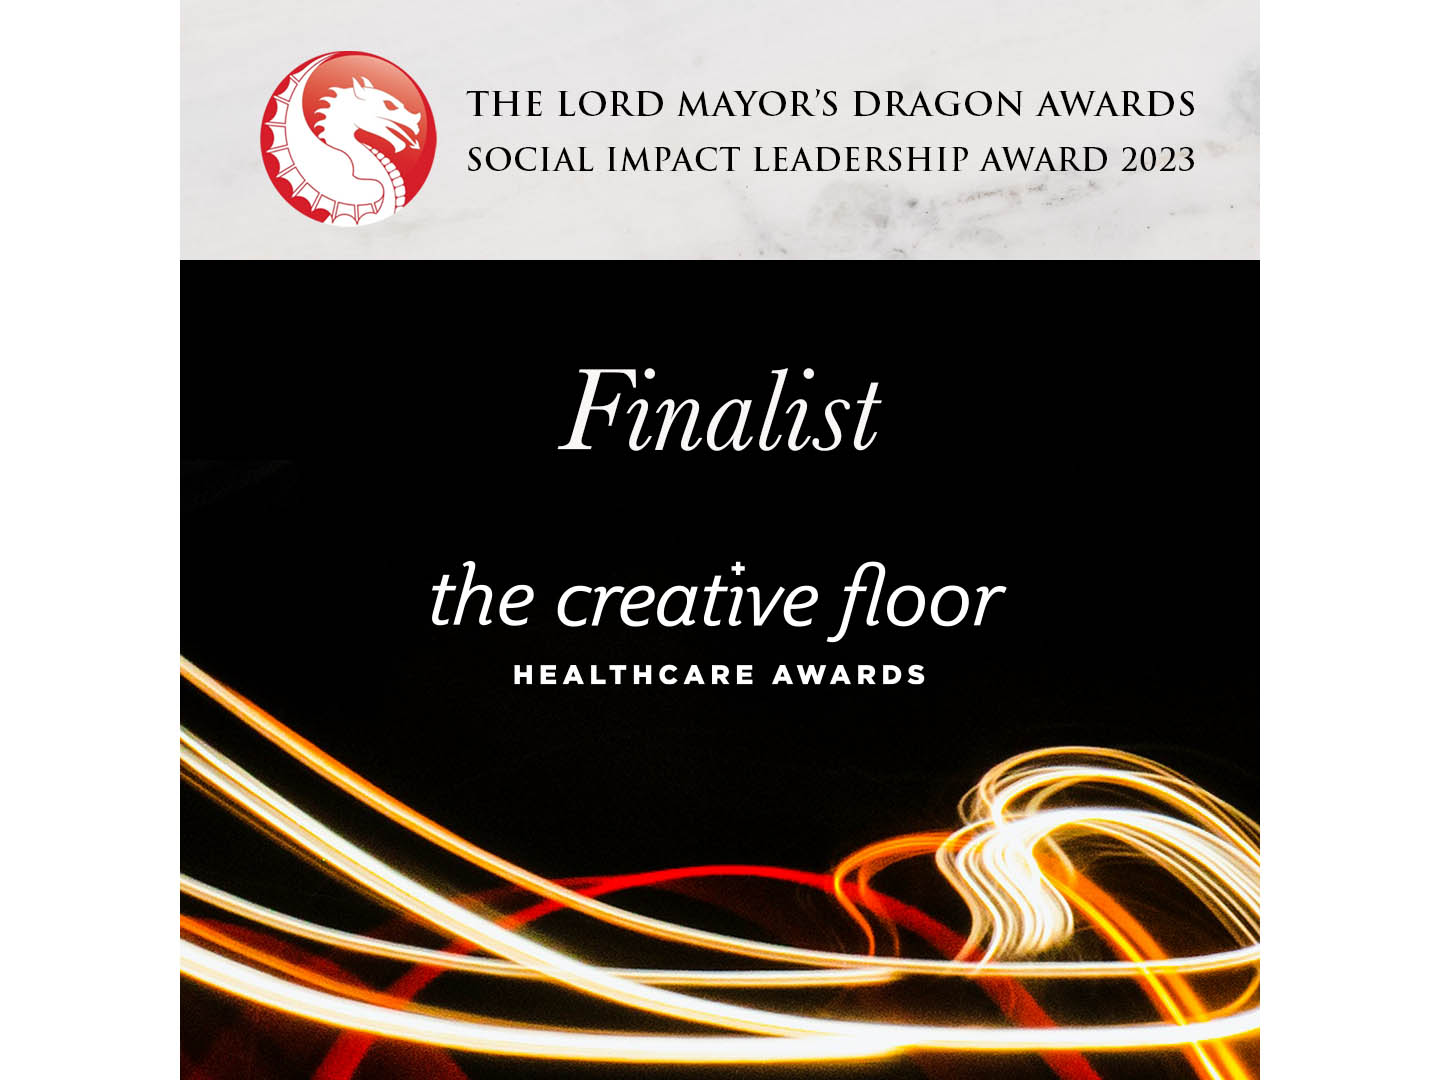 The Creative Floor Awards gets a remarkable recognition at the Lord Mayor’s Dragon Awards 